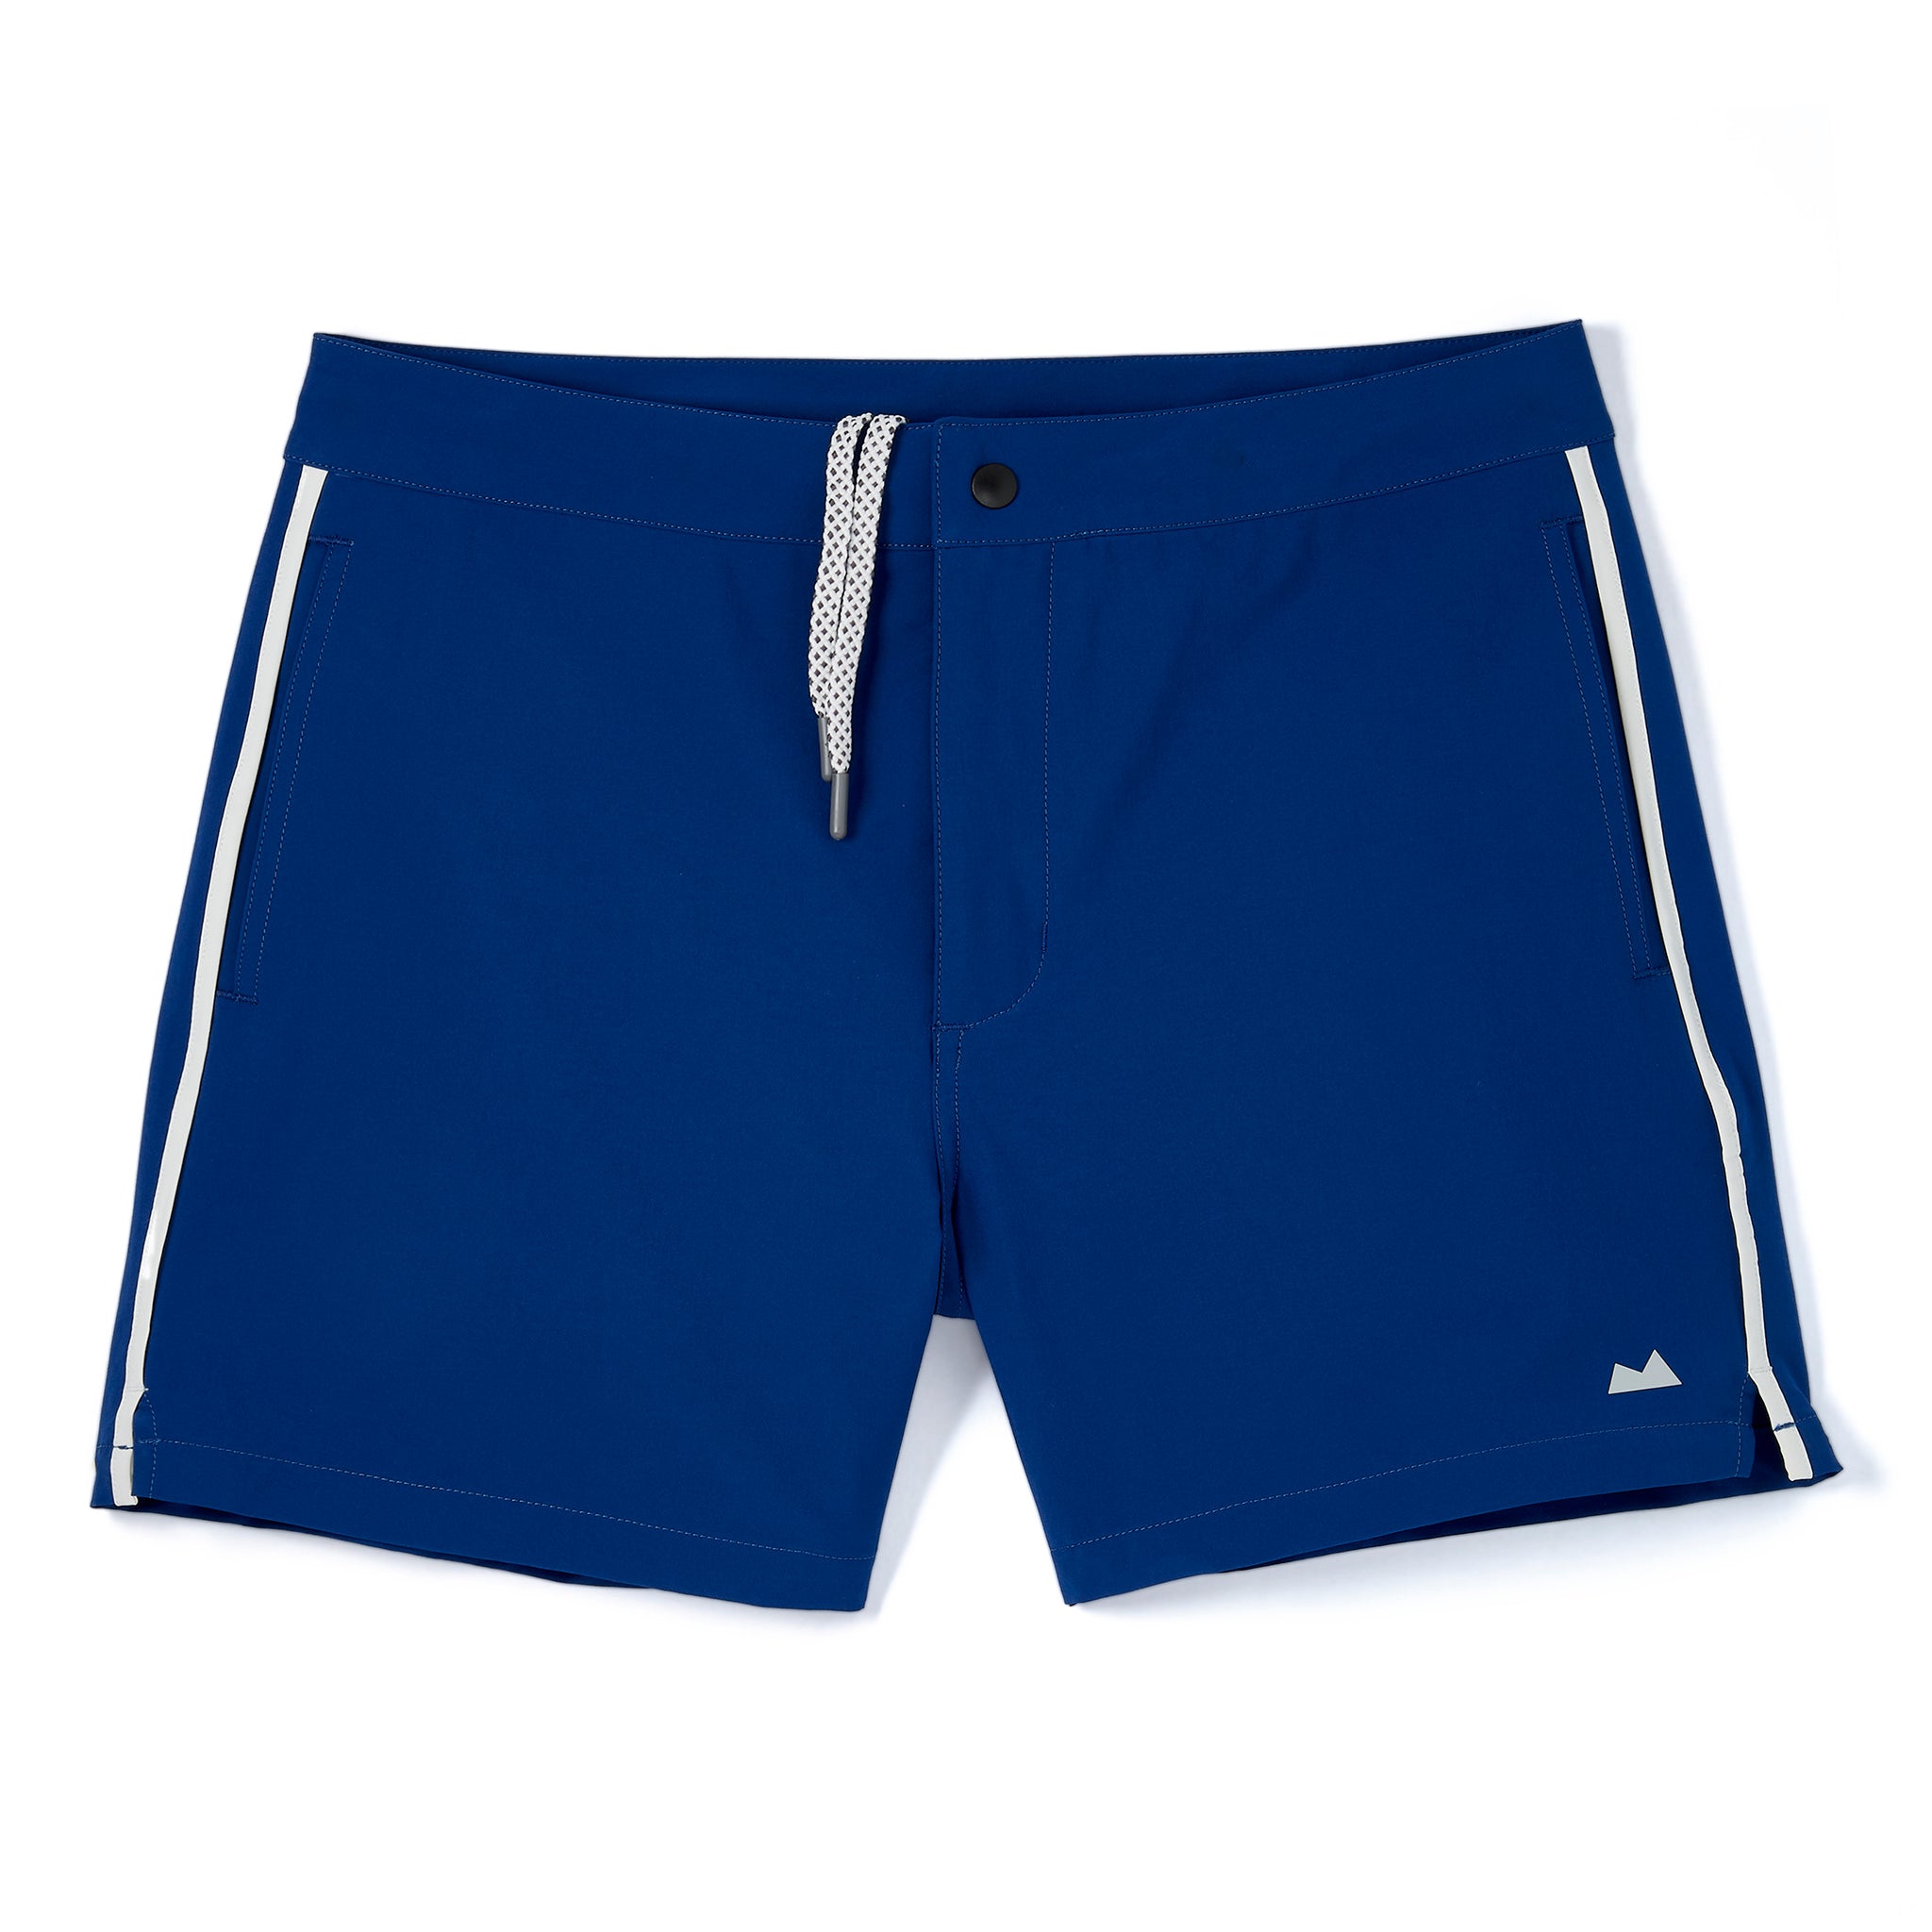 Straight cut swim shorts with pockets - Buy in Depedro